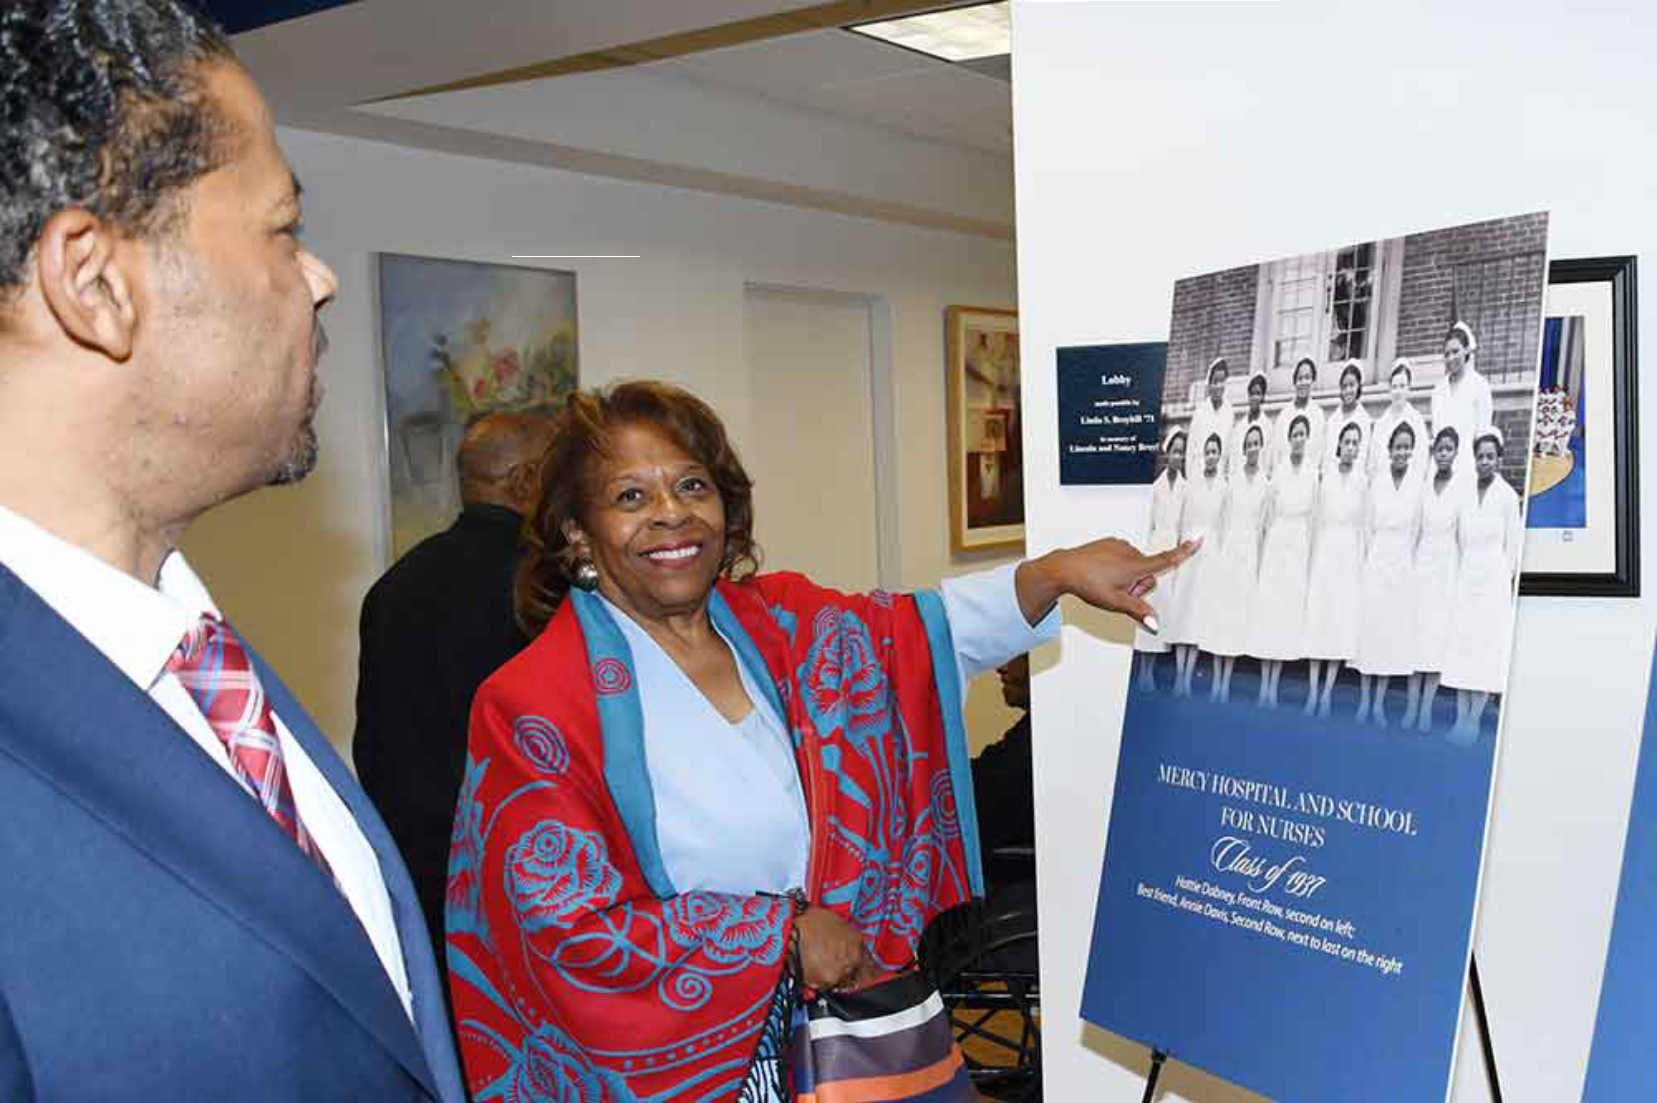 Past DSU President Dr. Wilma Mishoe points out her mother Hattie Dabney Mishoe in her Mercy Douglas School of Nursing graduation picture on display in the building that now bears her name -- the Hattie Dabney Mishoe Nursing Hall.